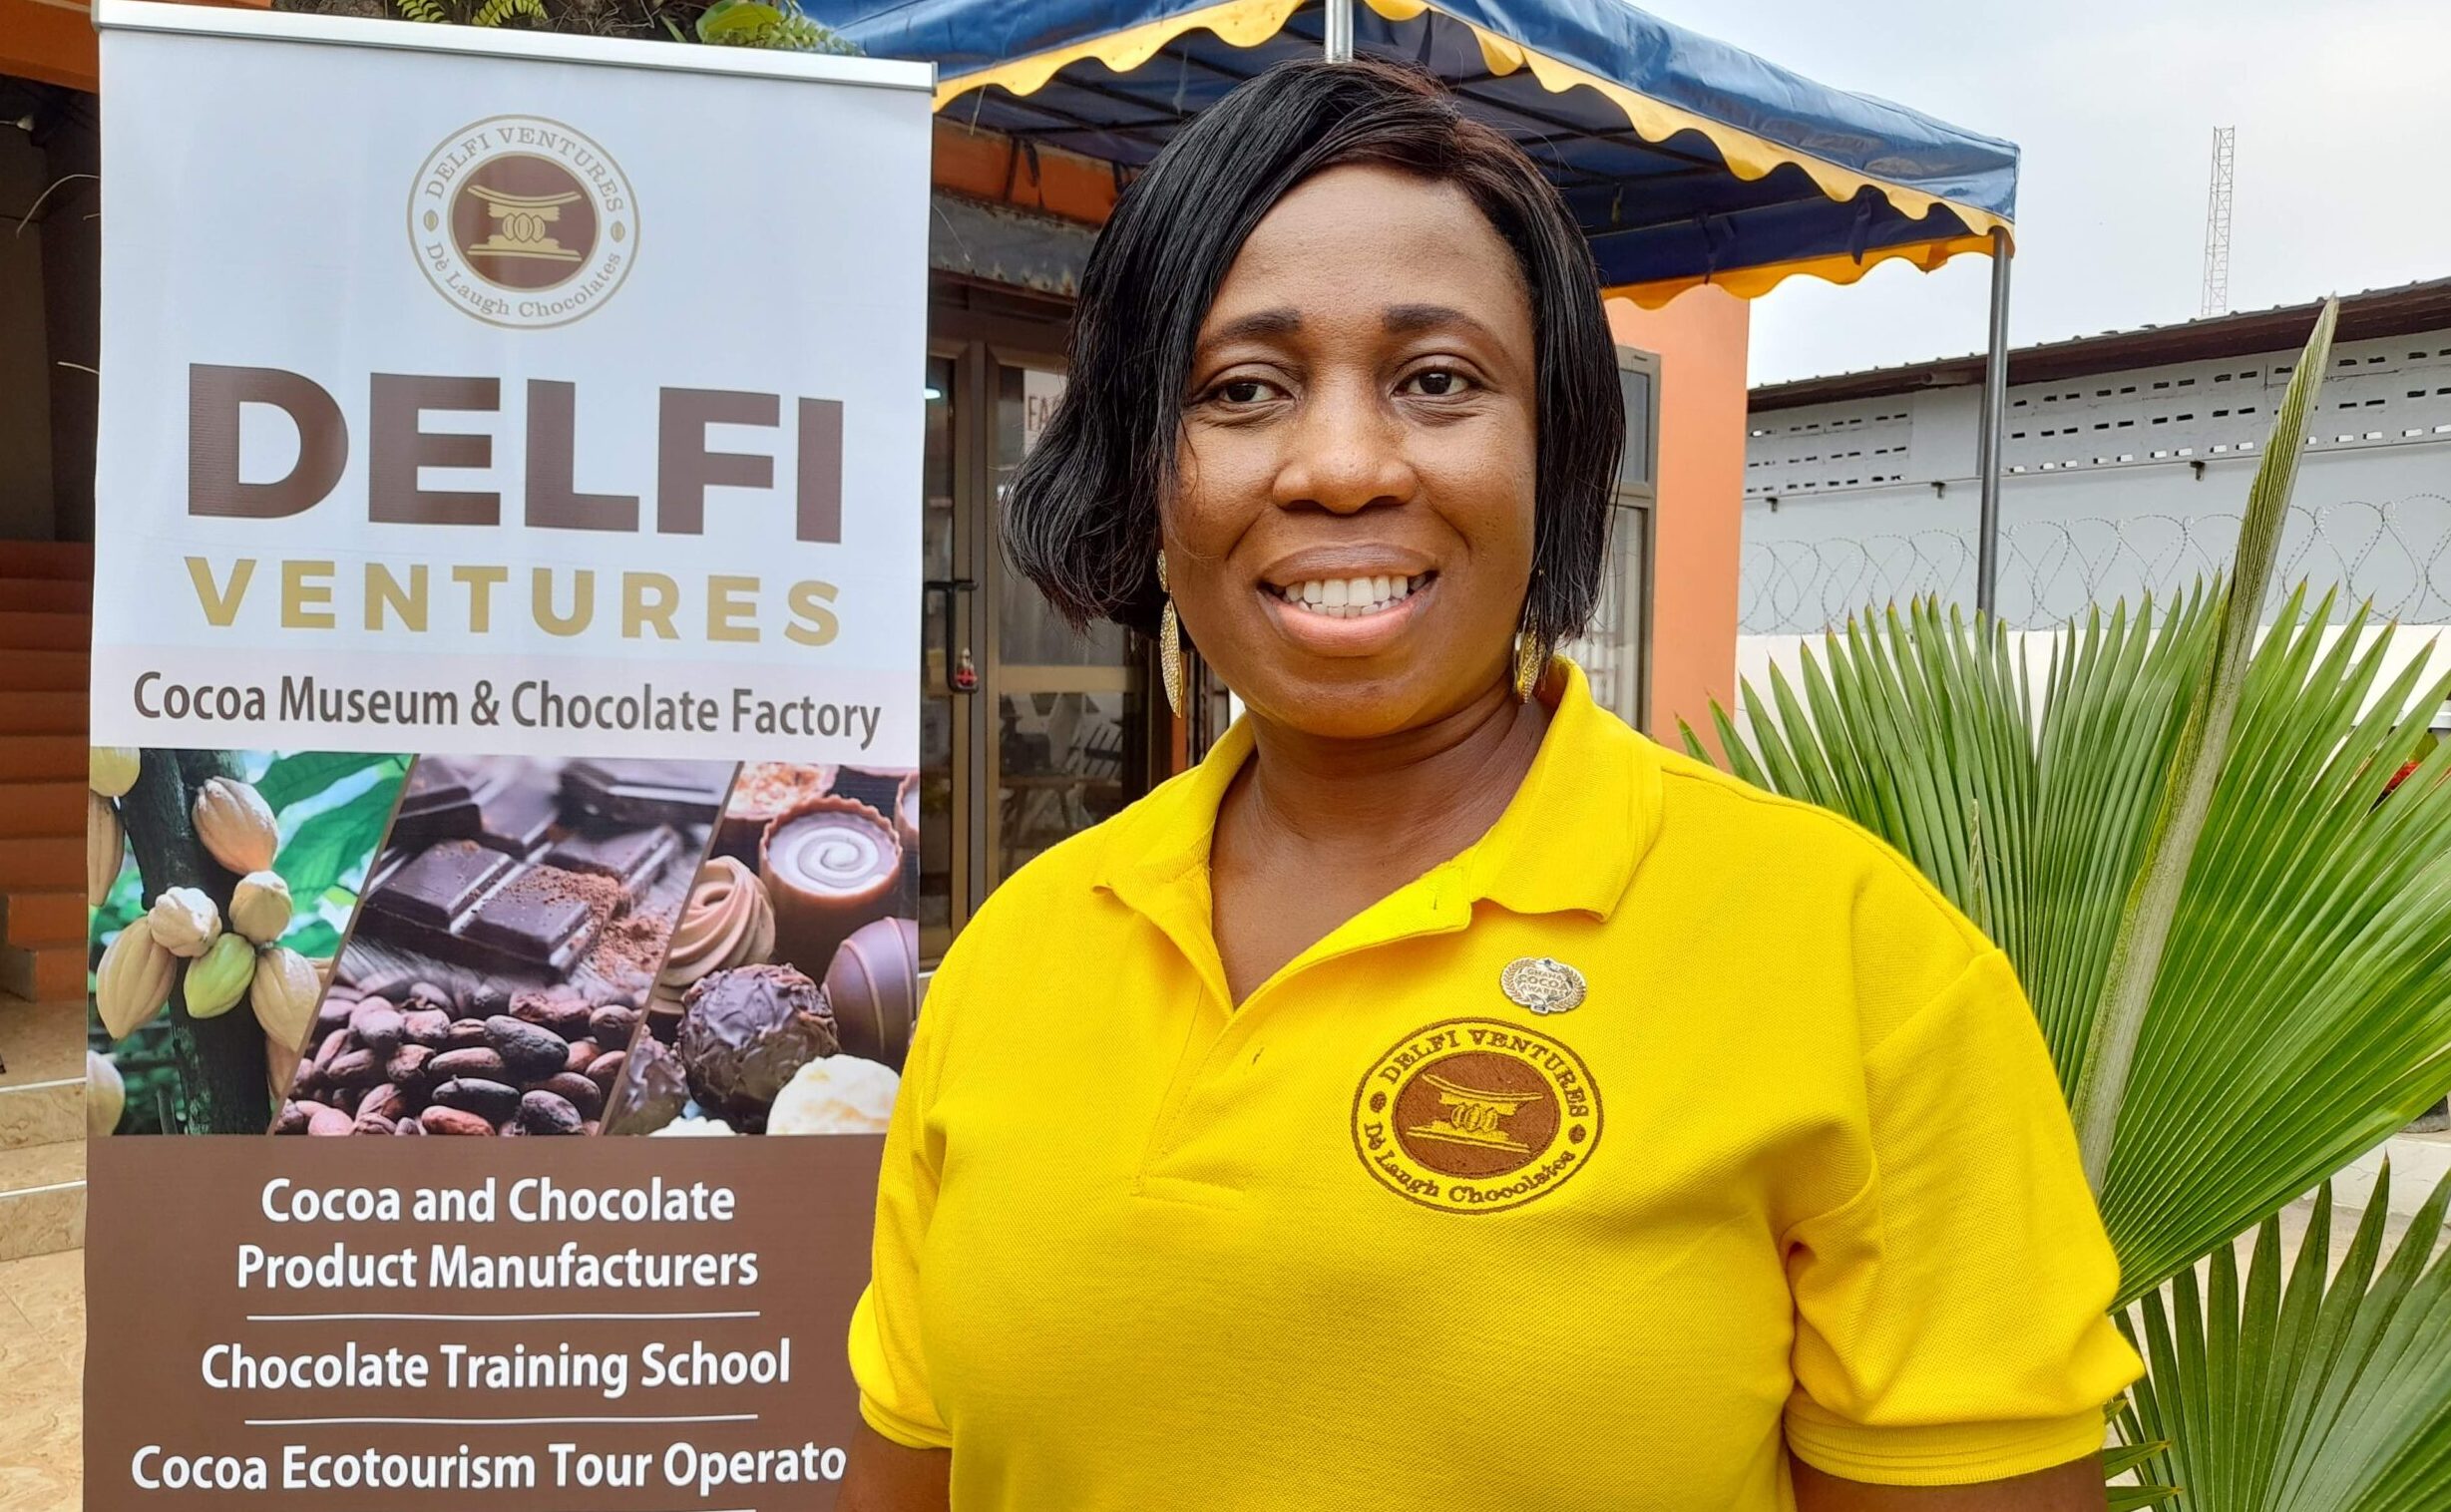 Cocoa museum and chocolate factory